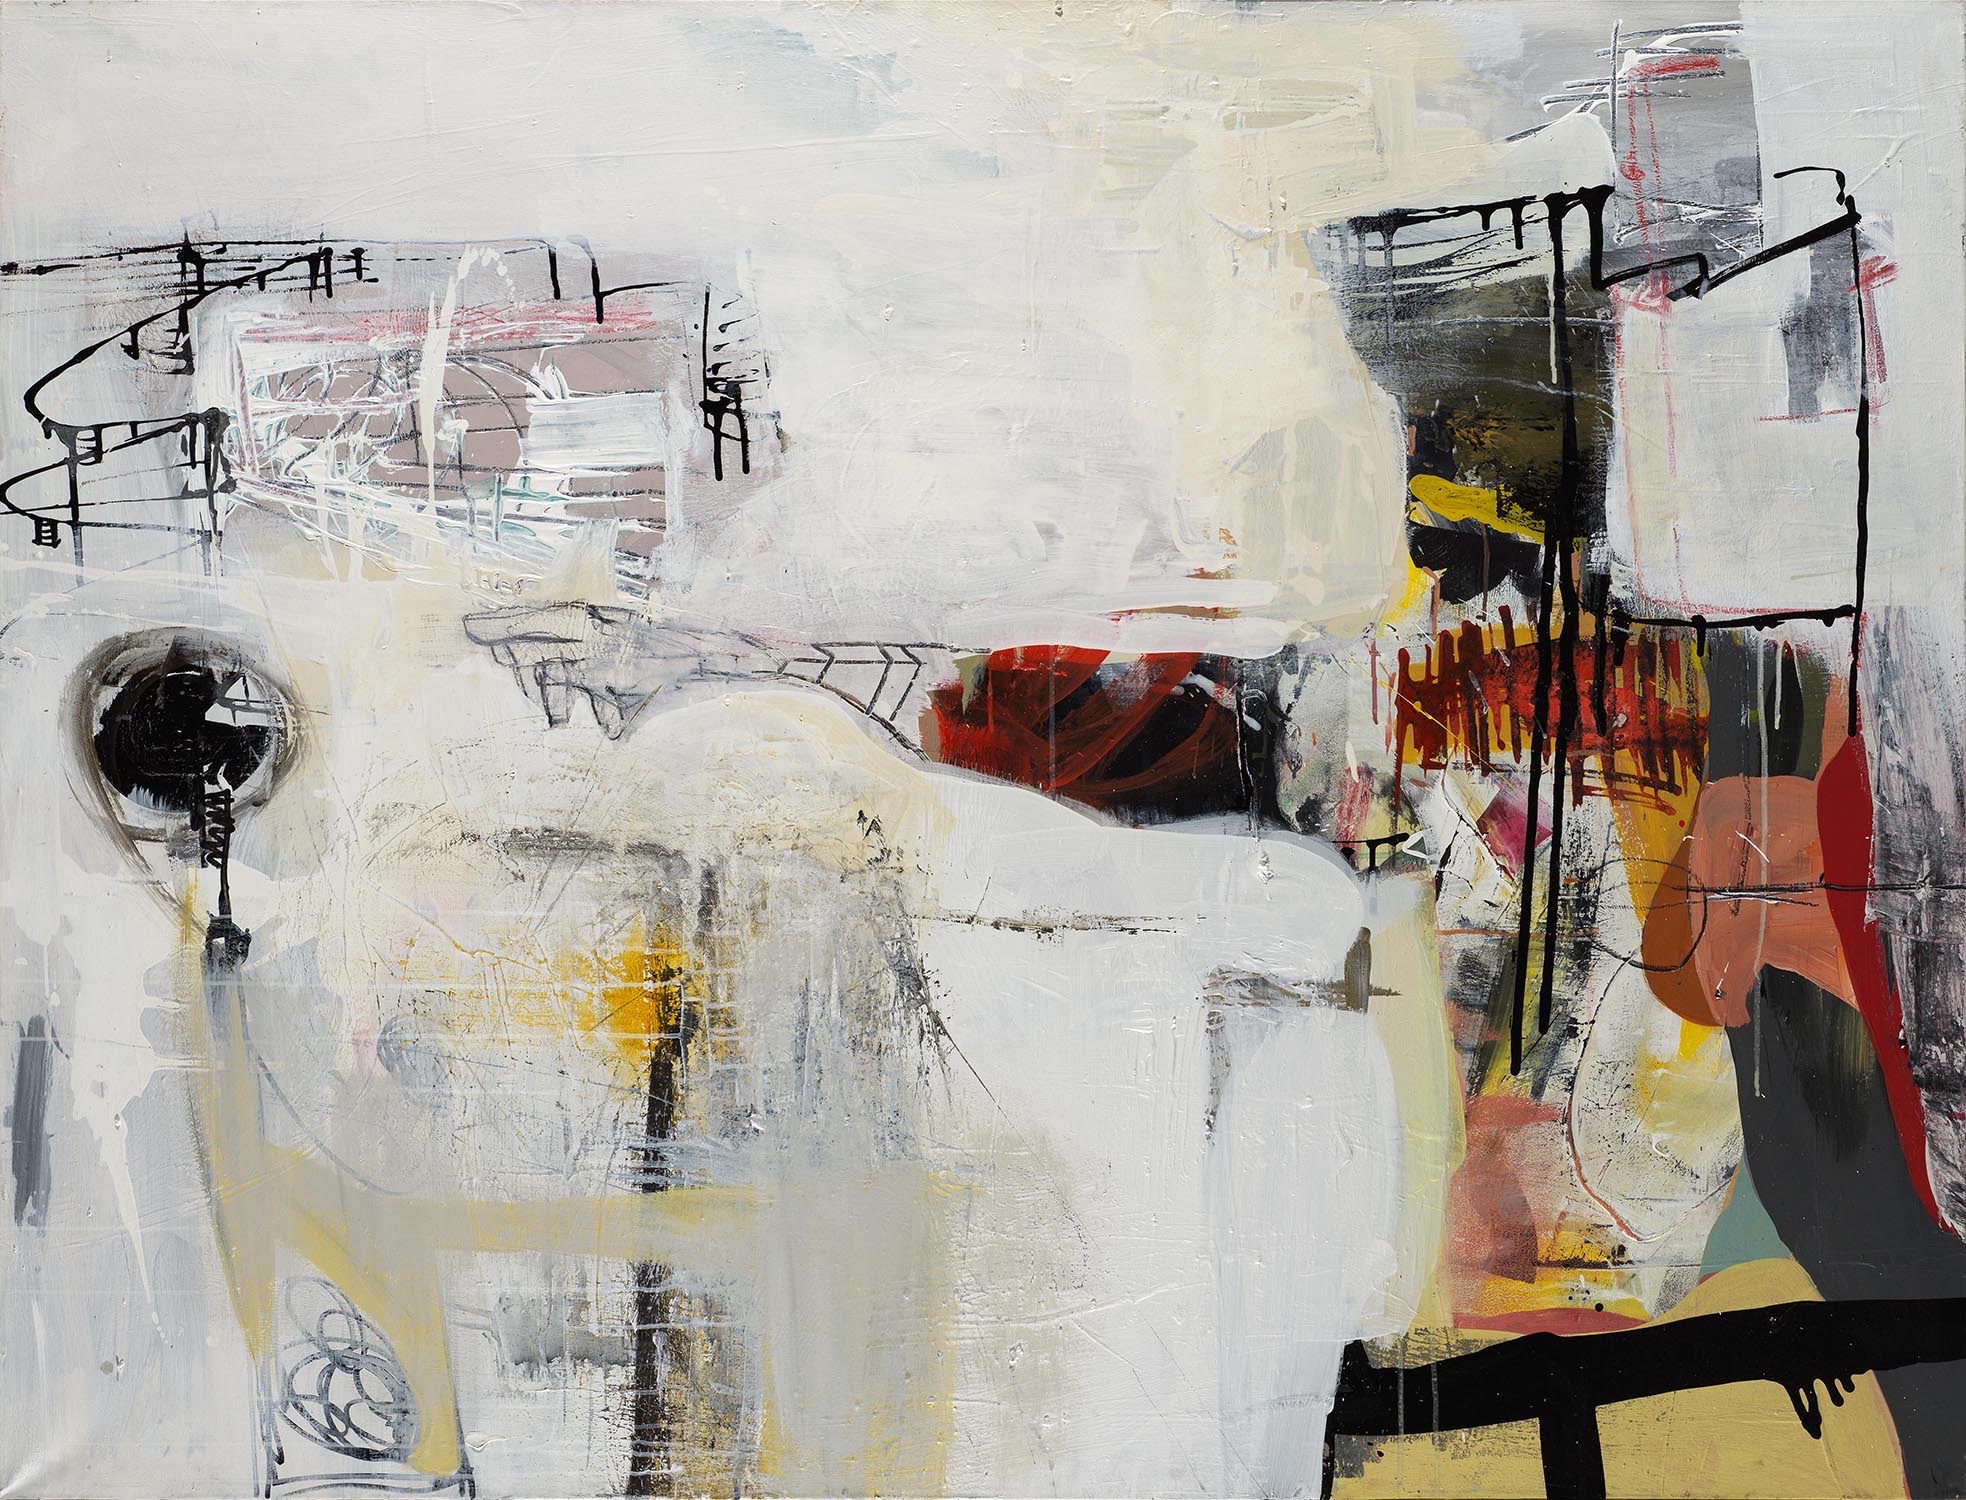 Untitled 170x130 cm mixed media on canvas